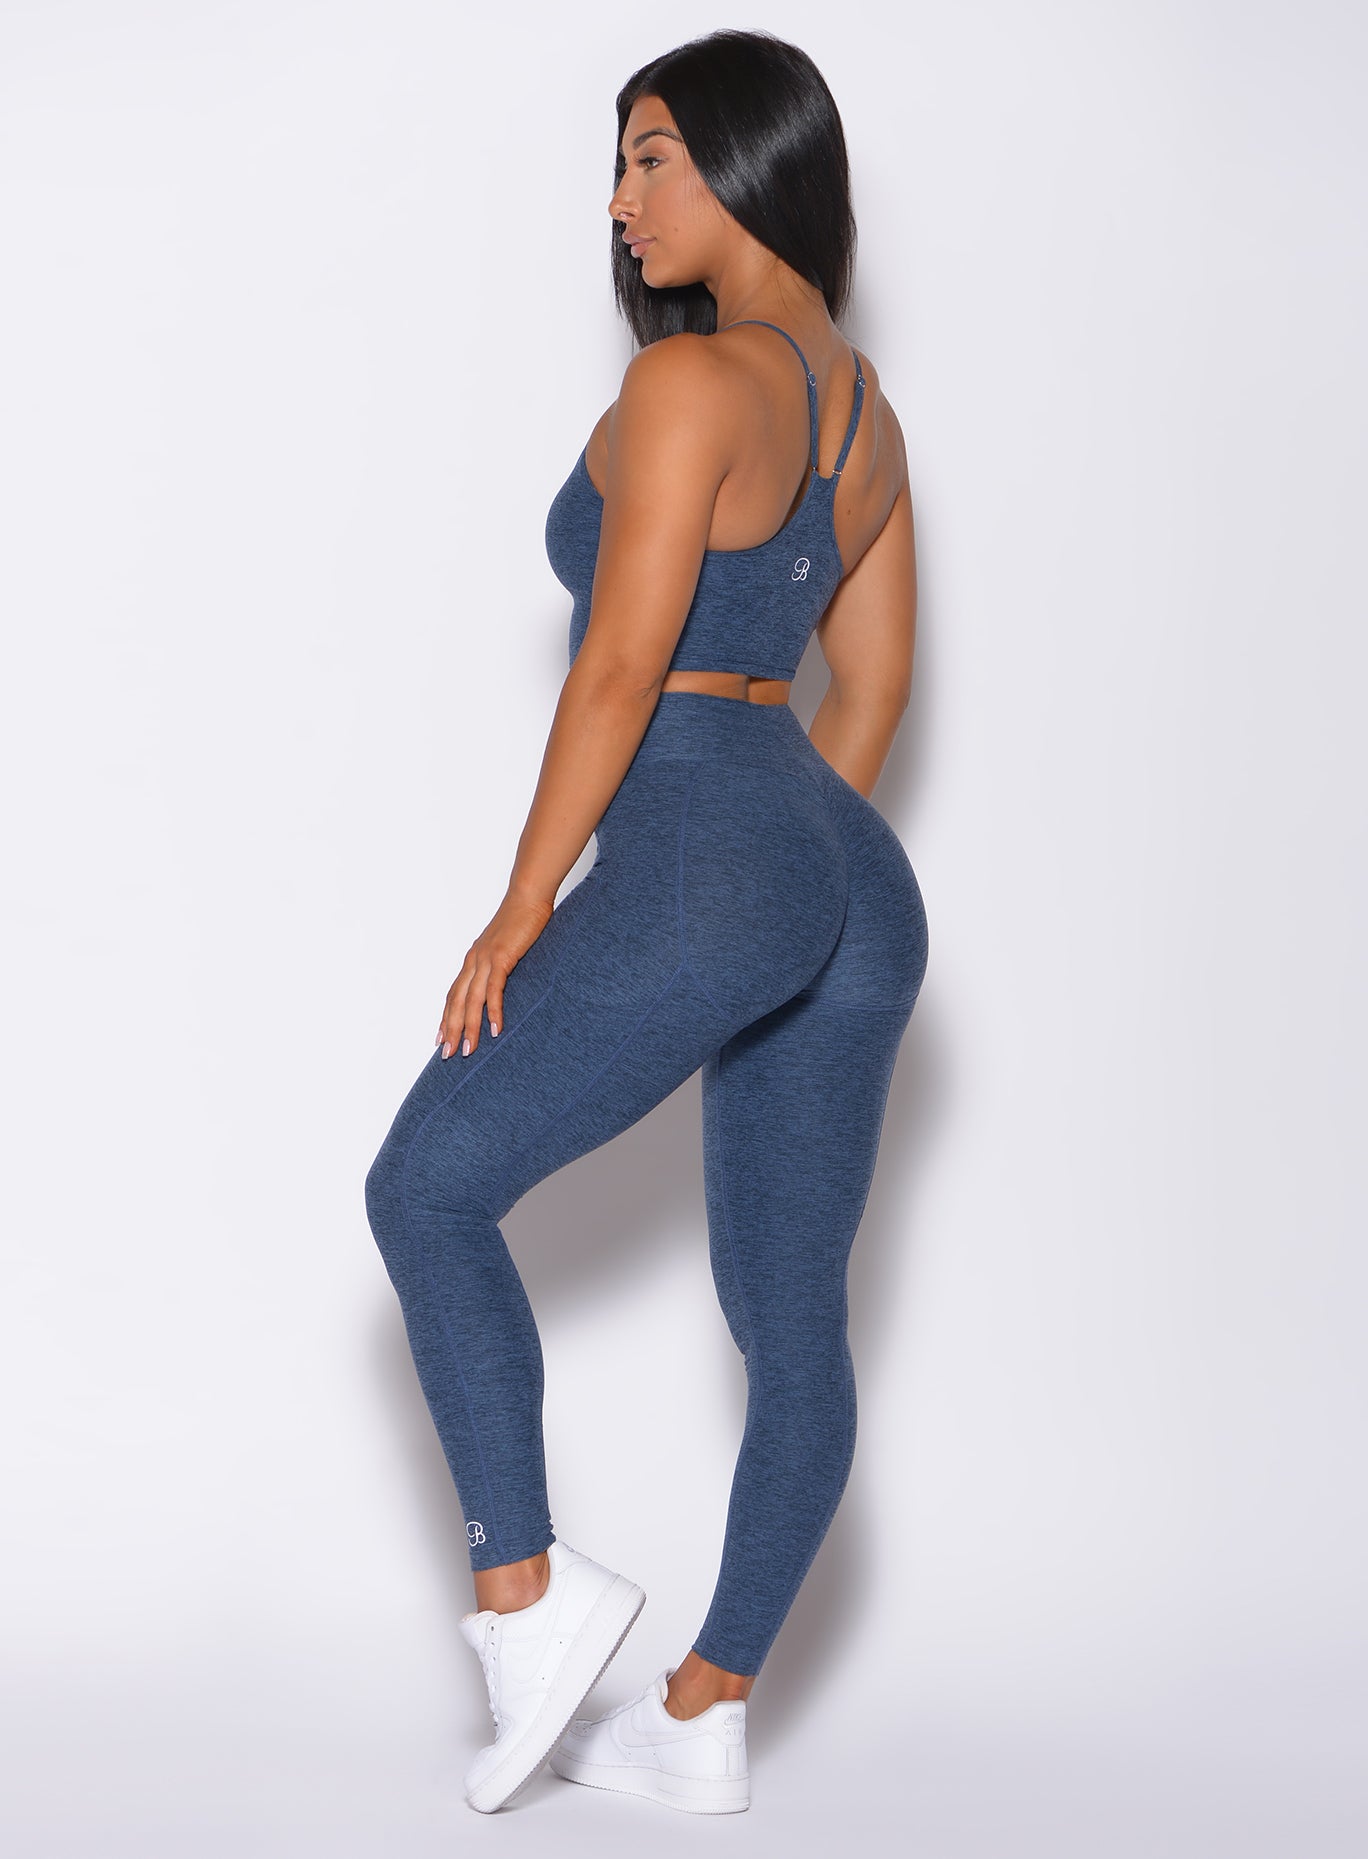 Left side profile view of a model facing forward wearing our relax long bra in night sky color and a matching leggings